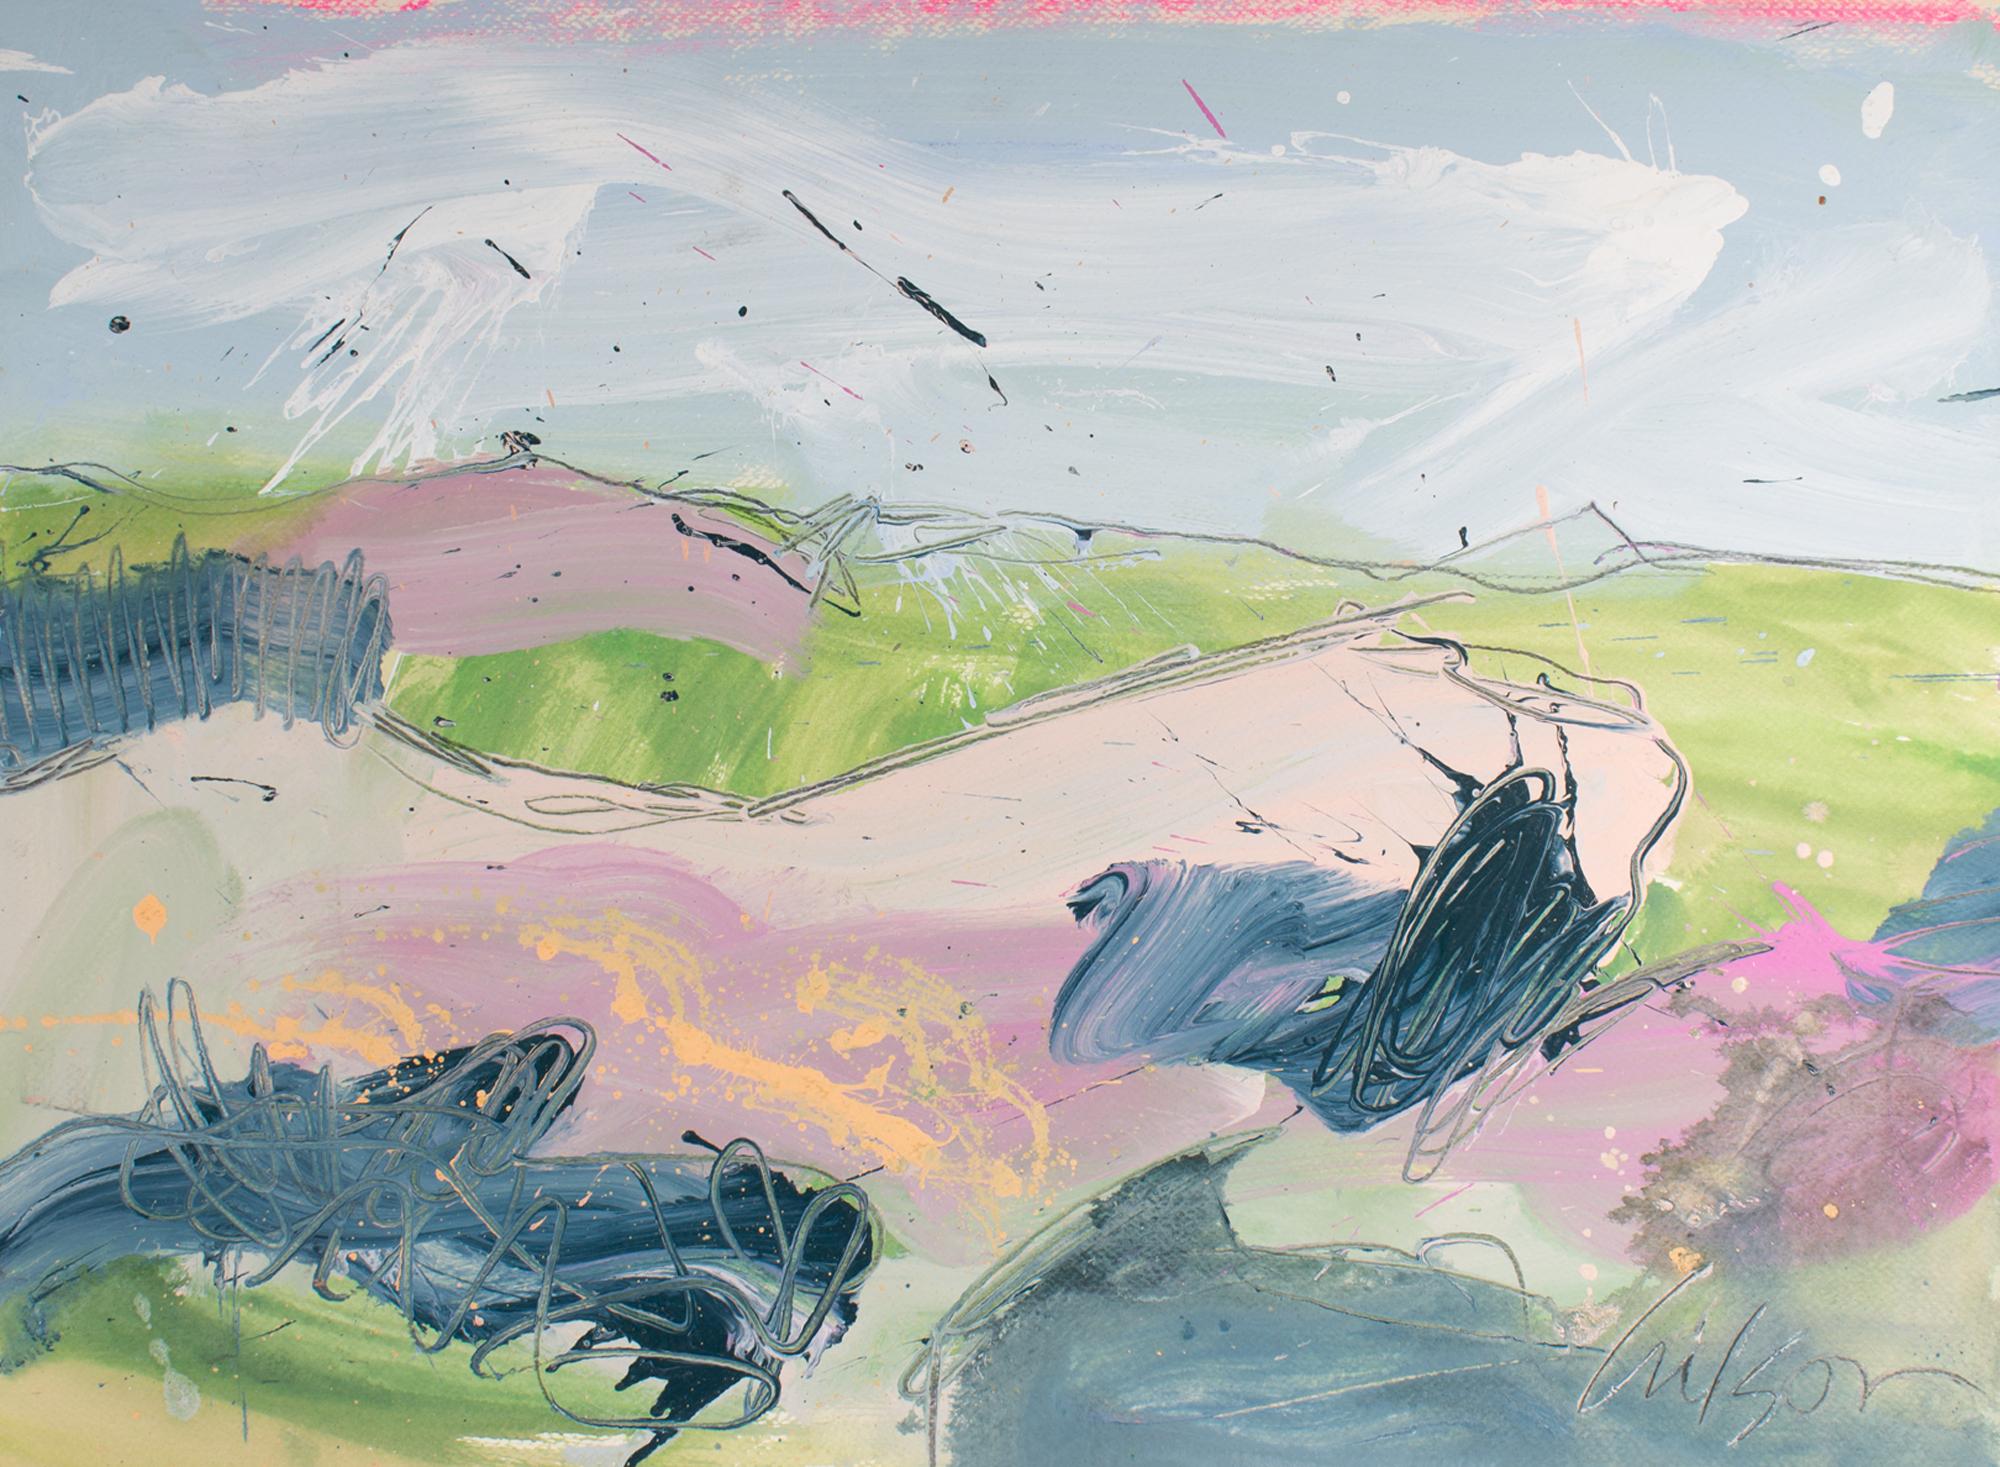 A 1980s acrylic and gouache on paper painting by the American artist Harry Hilson (1935-2004). This abstract work depicts a landscape painted in pastel colors with green, pink, and blue hills under a pale blue sky. Signed to the lower right, the